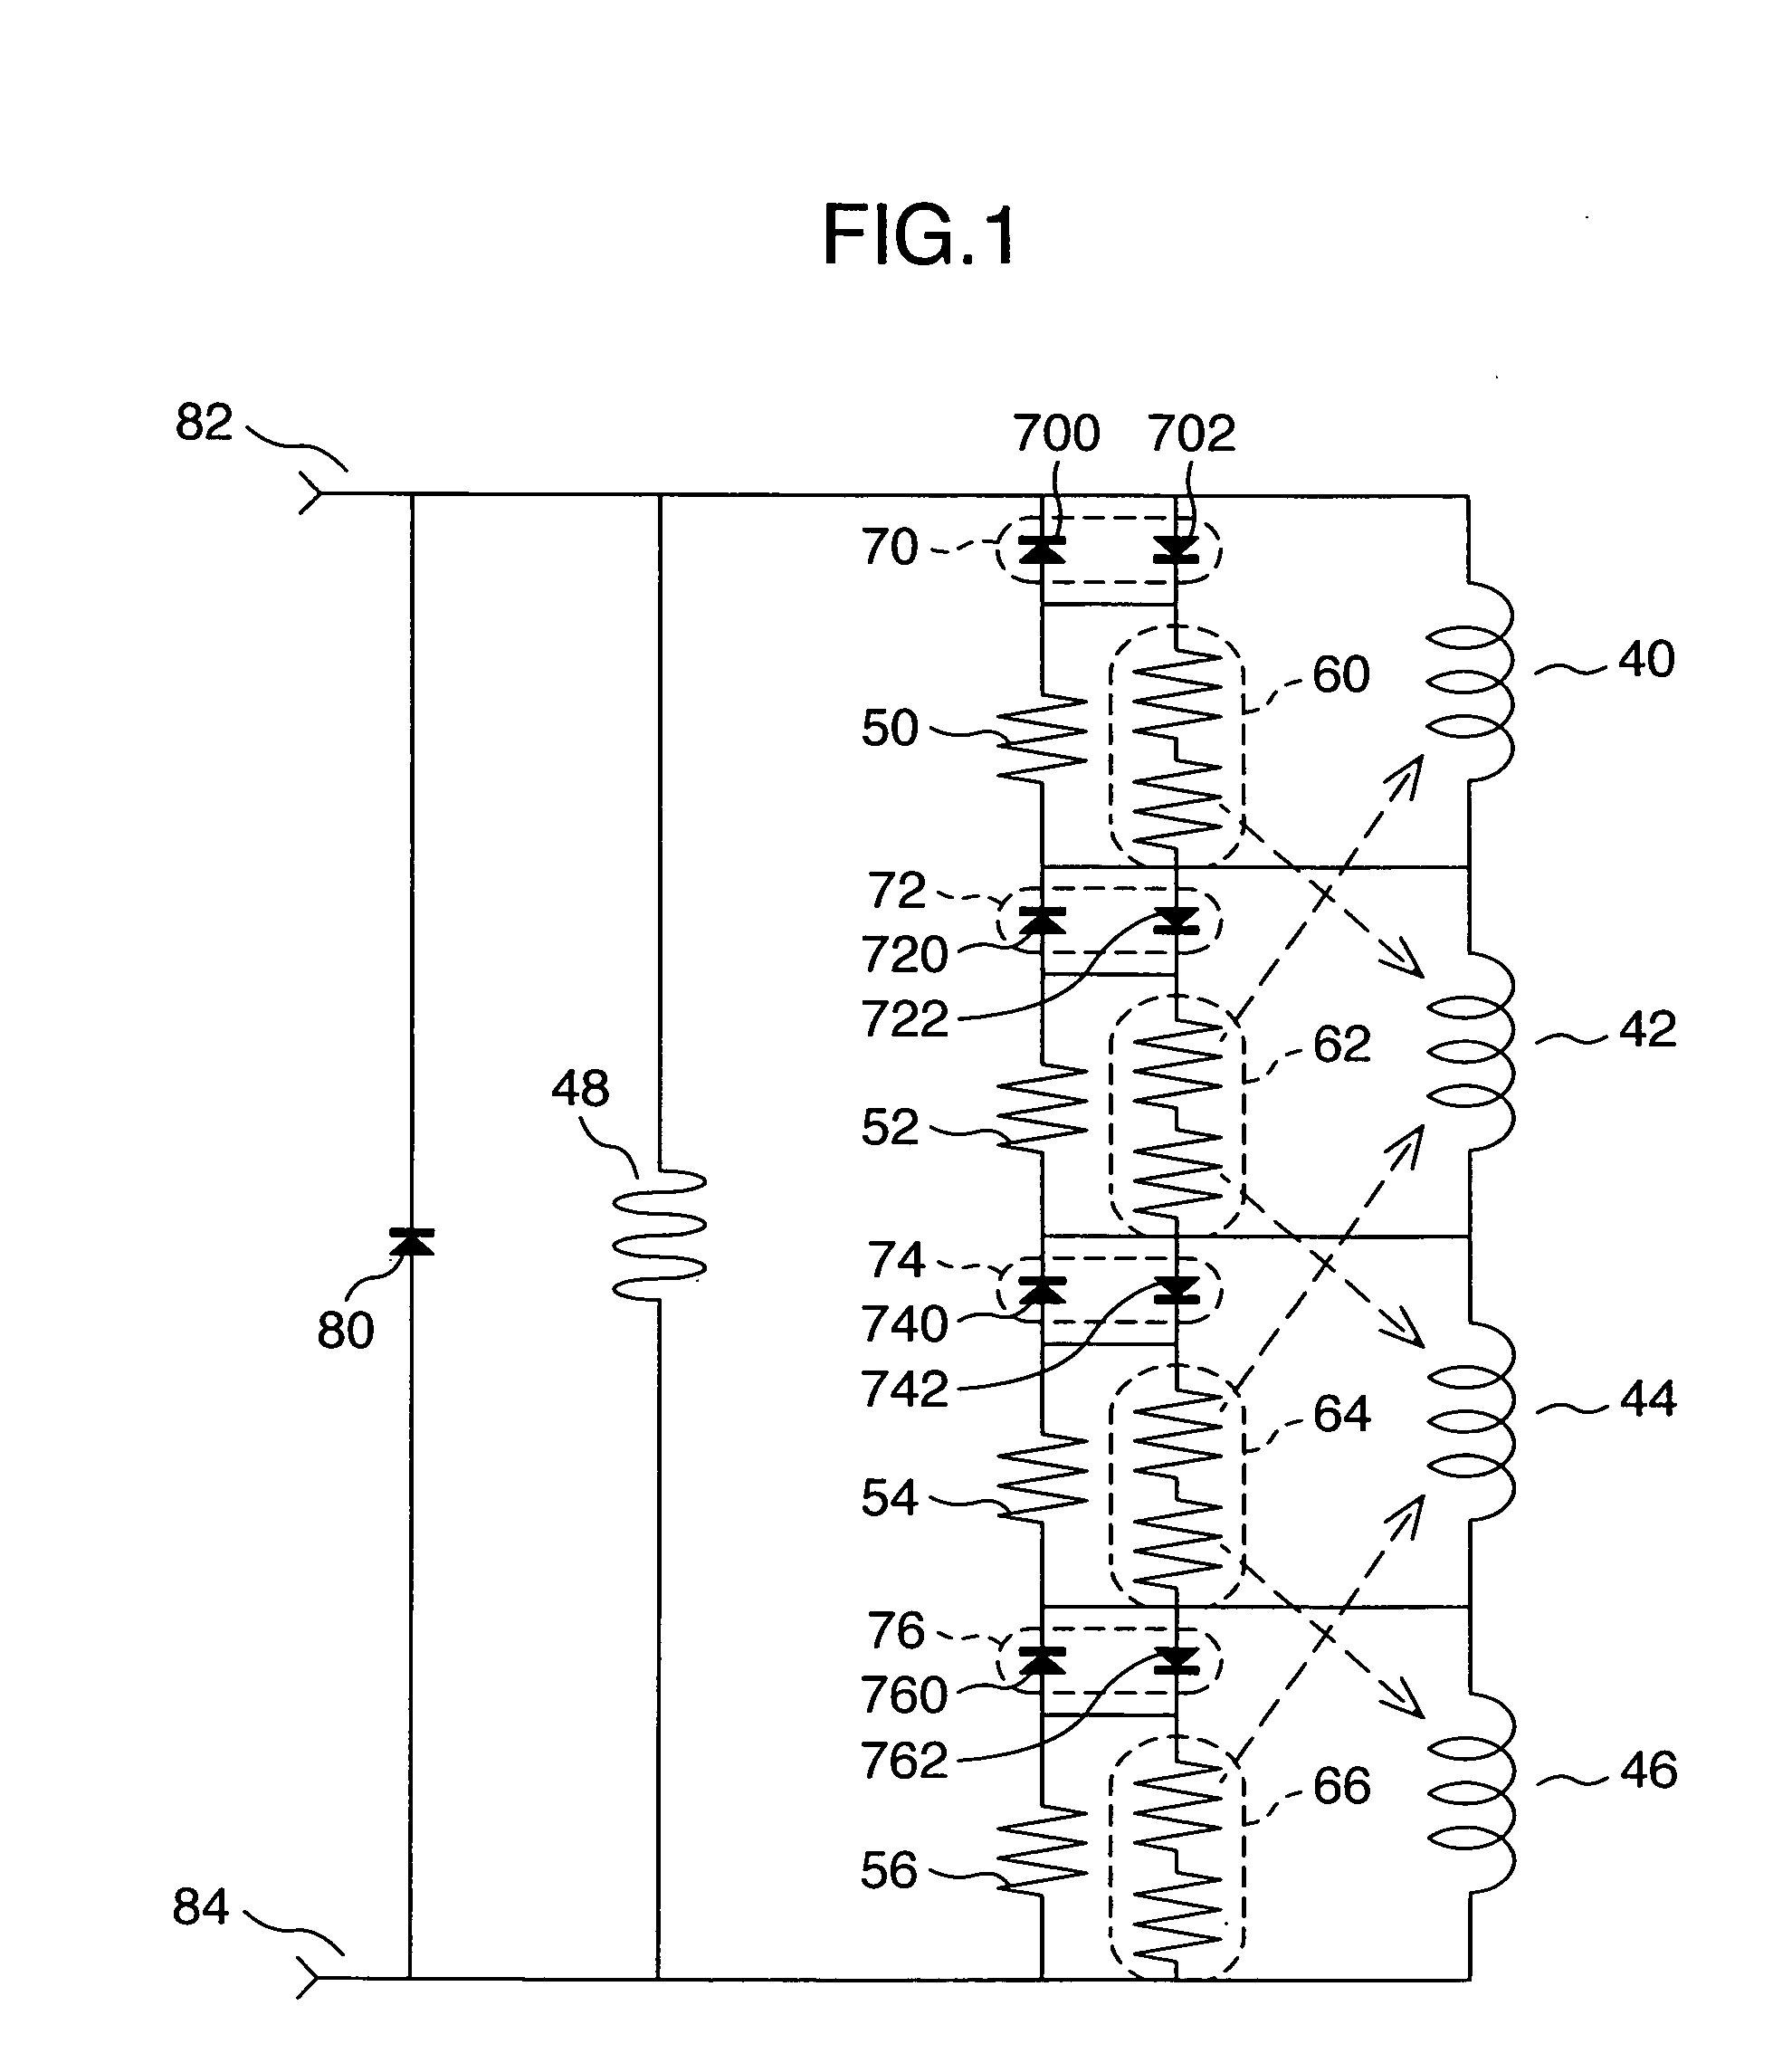 Superconducting magnet system with quench protection circuit